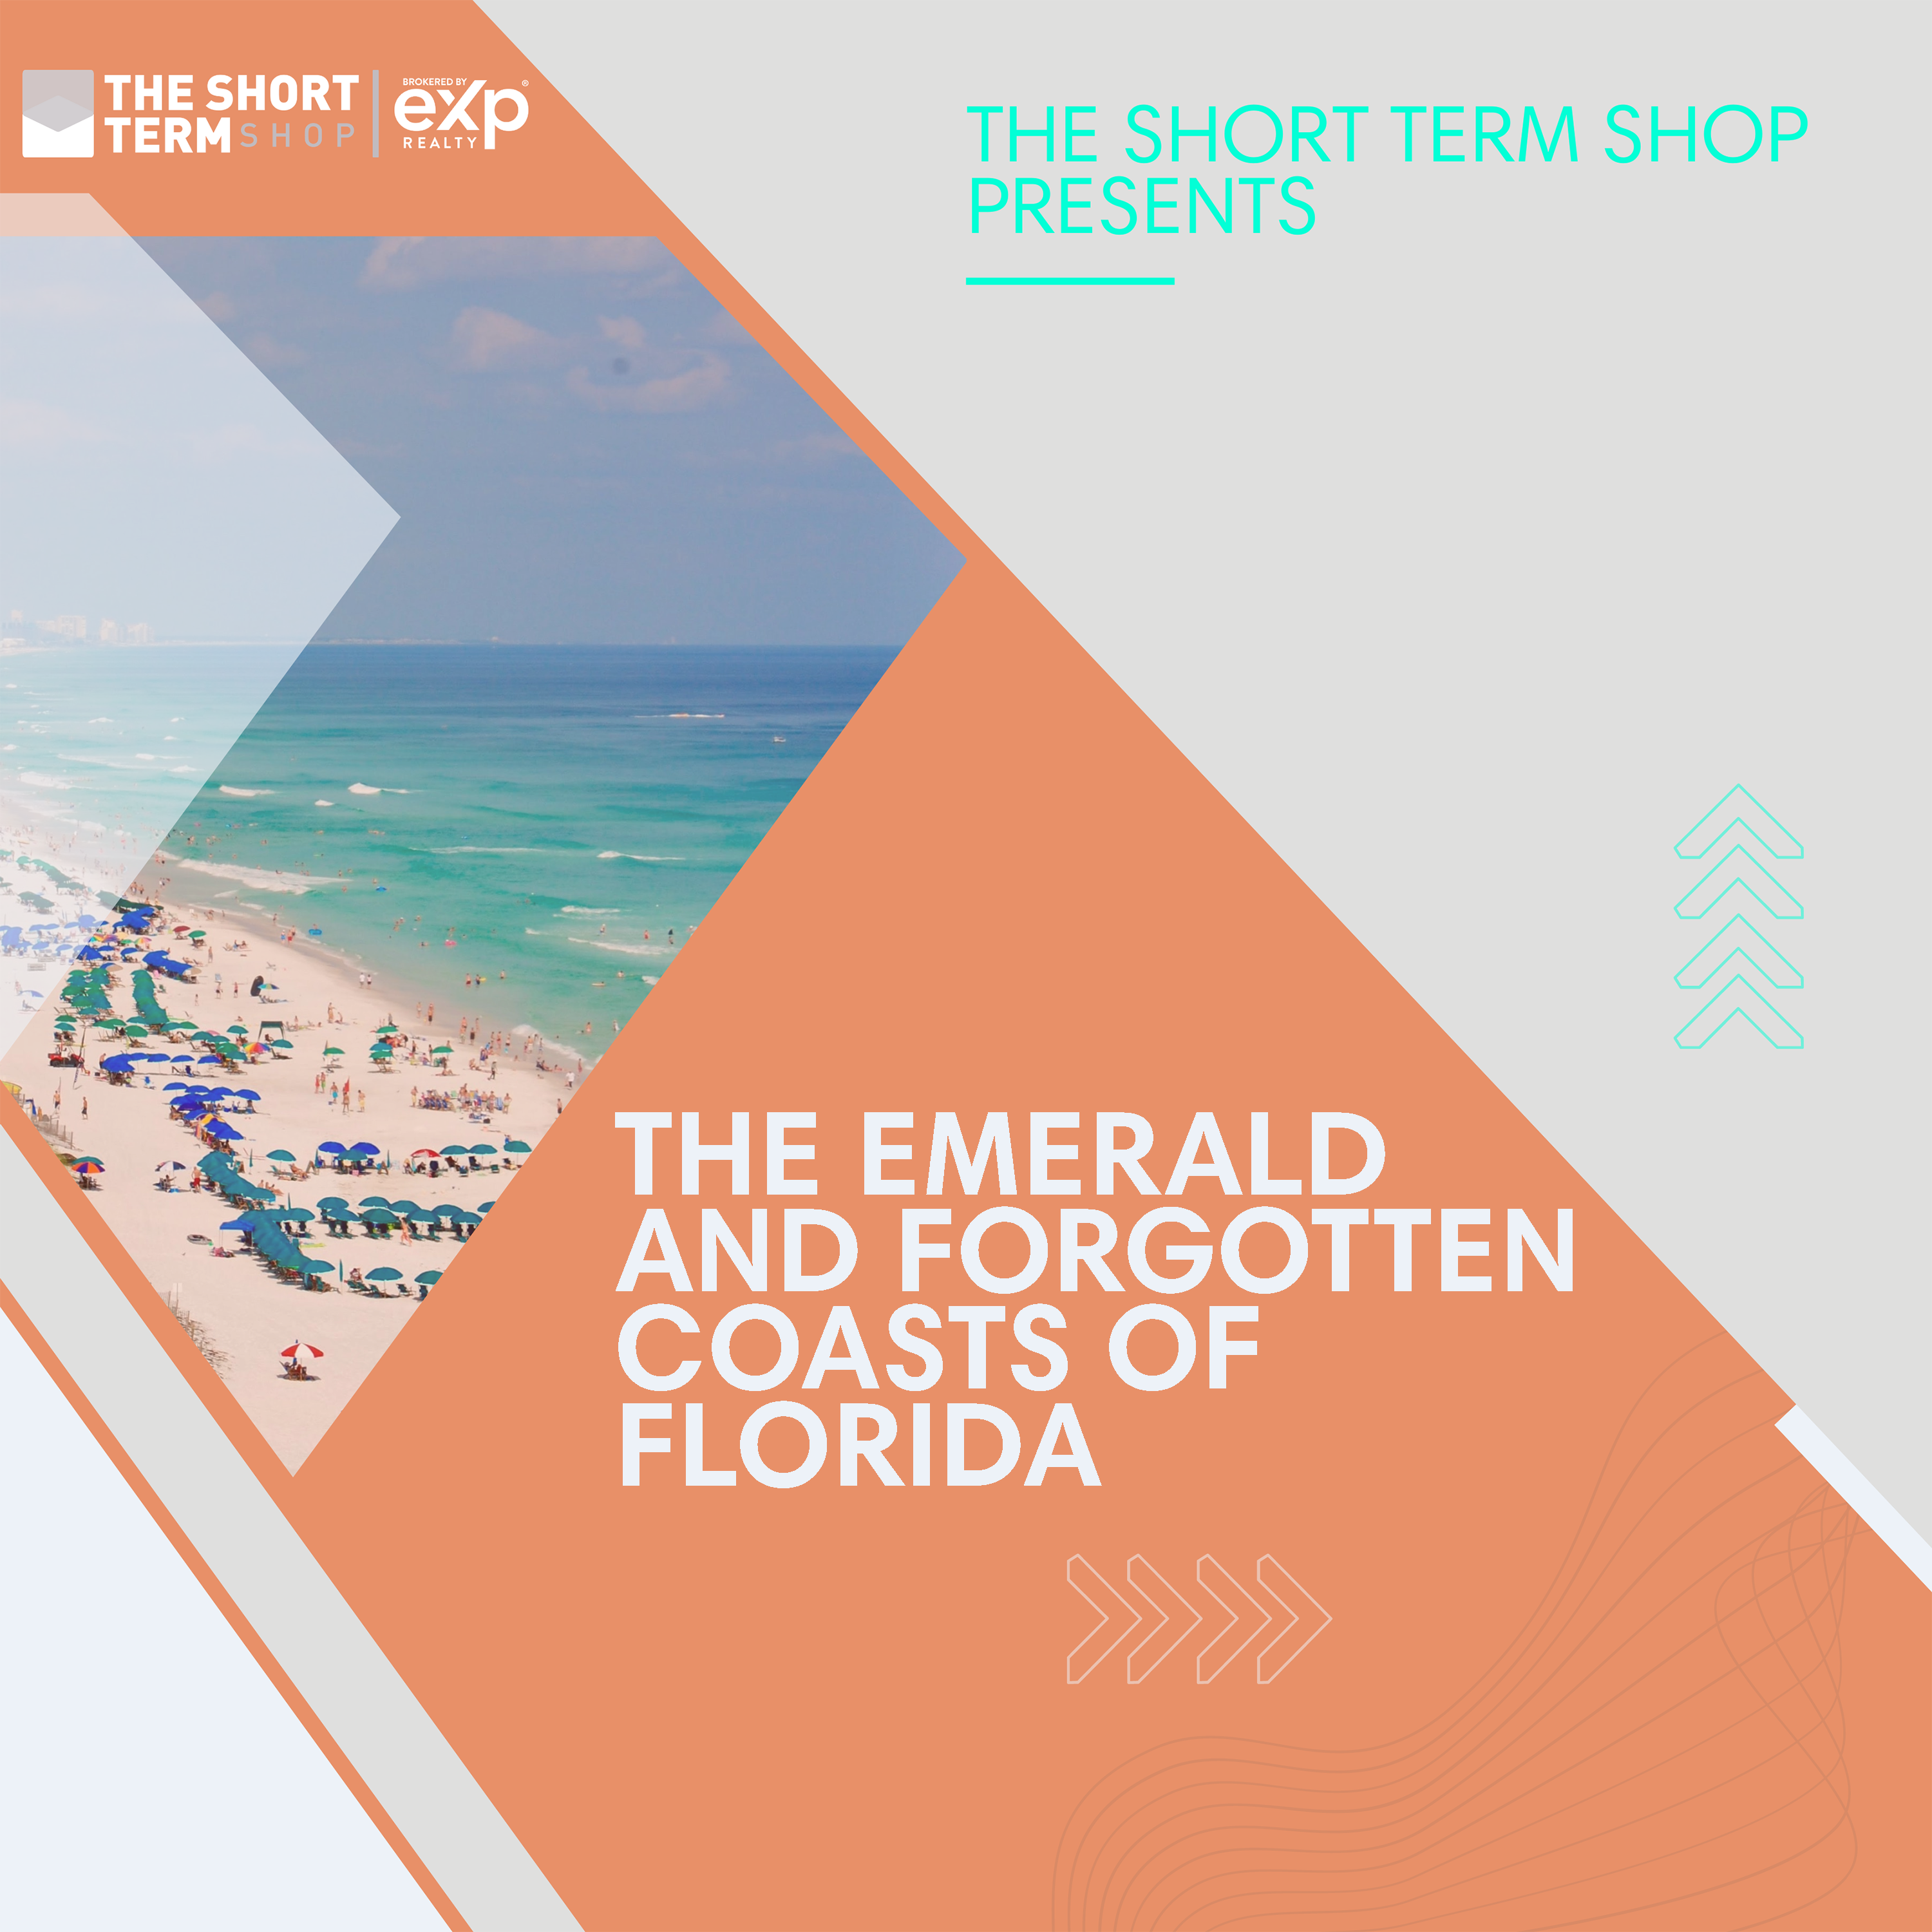 Financing Airbnbs in the Emerald and Forgotten Coasts of Florida